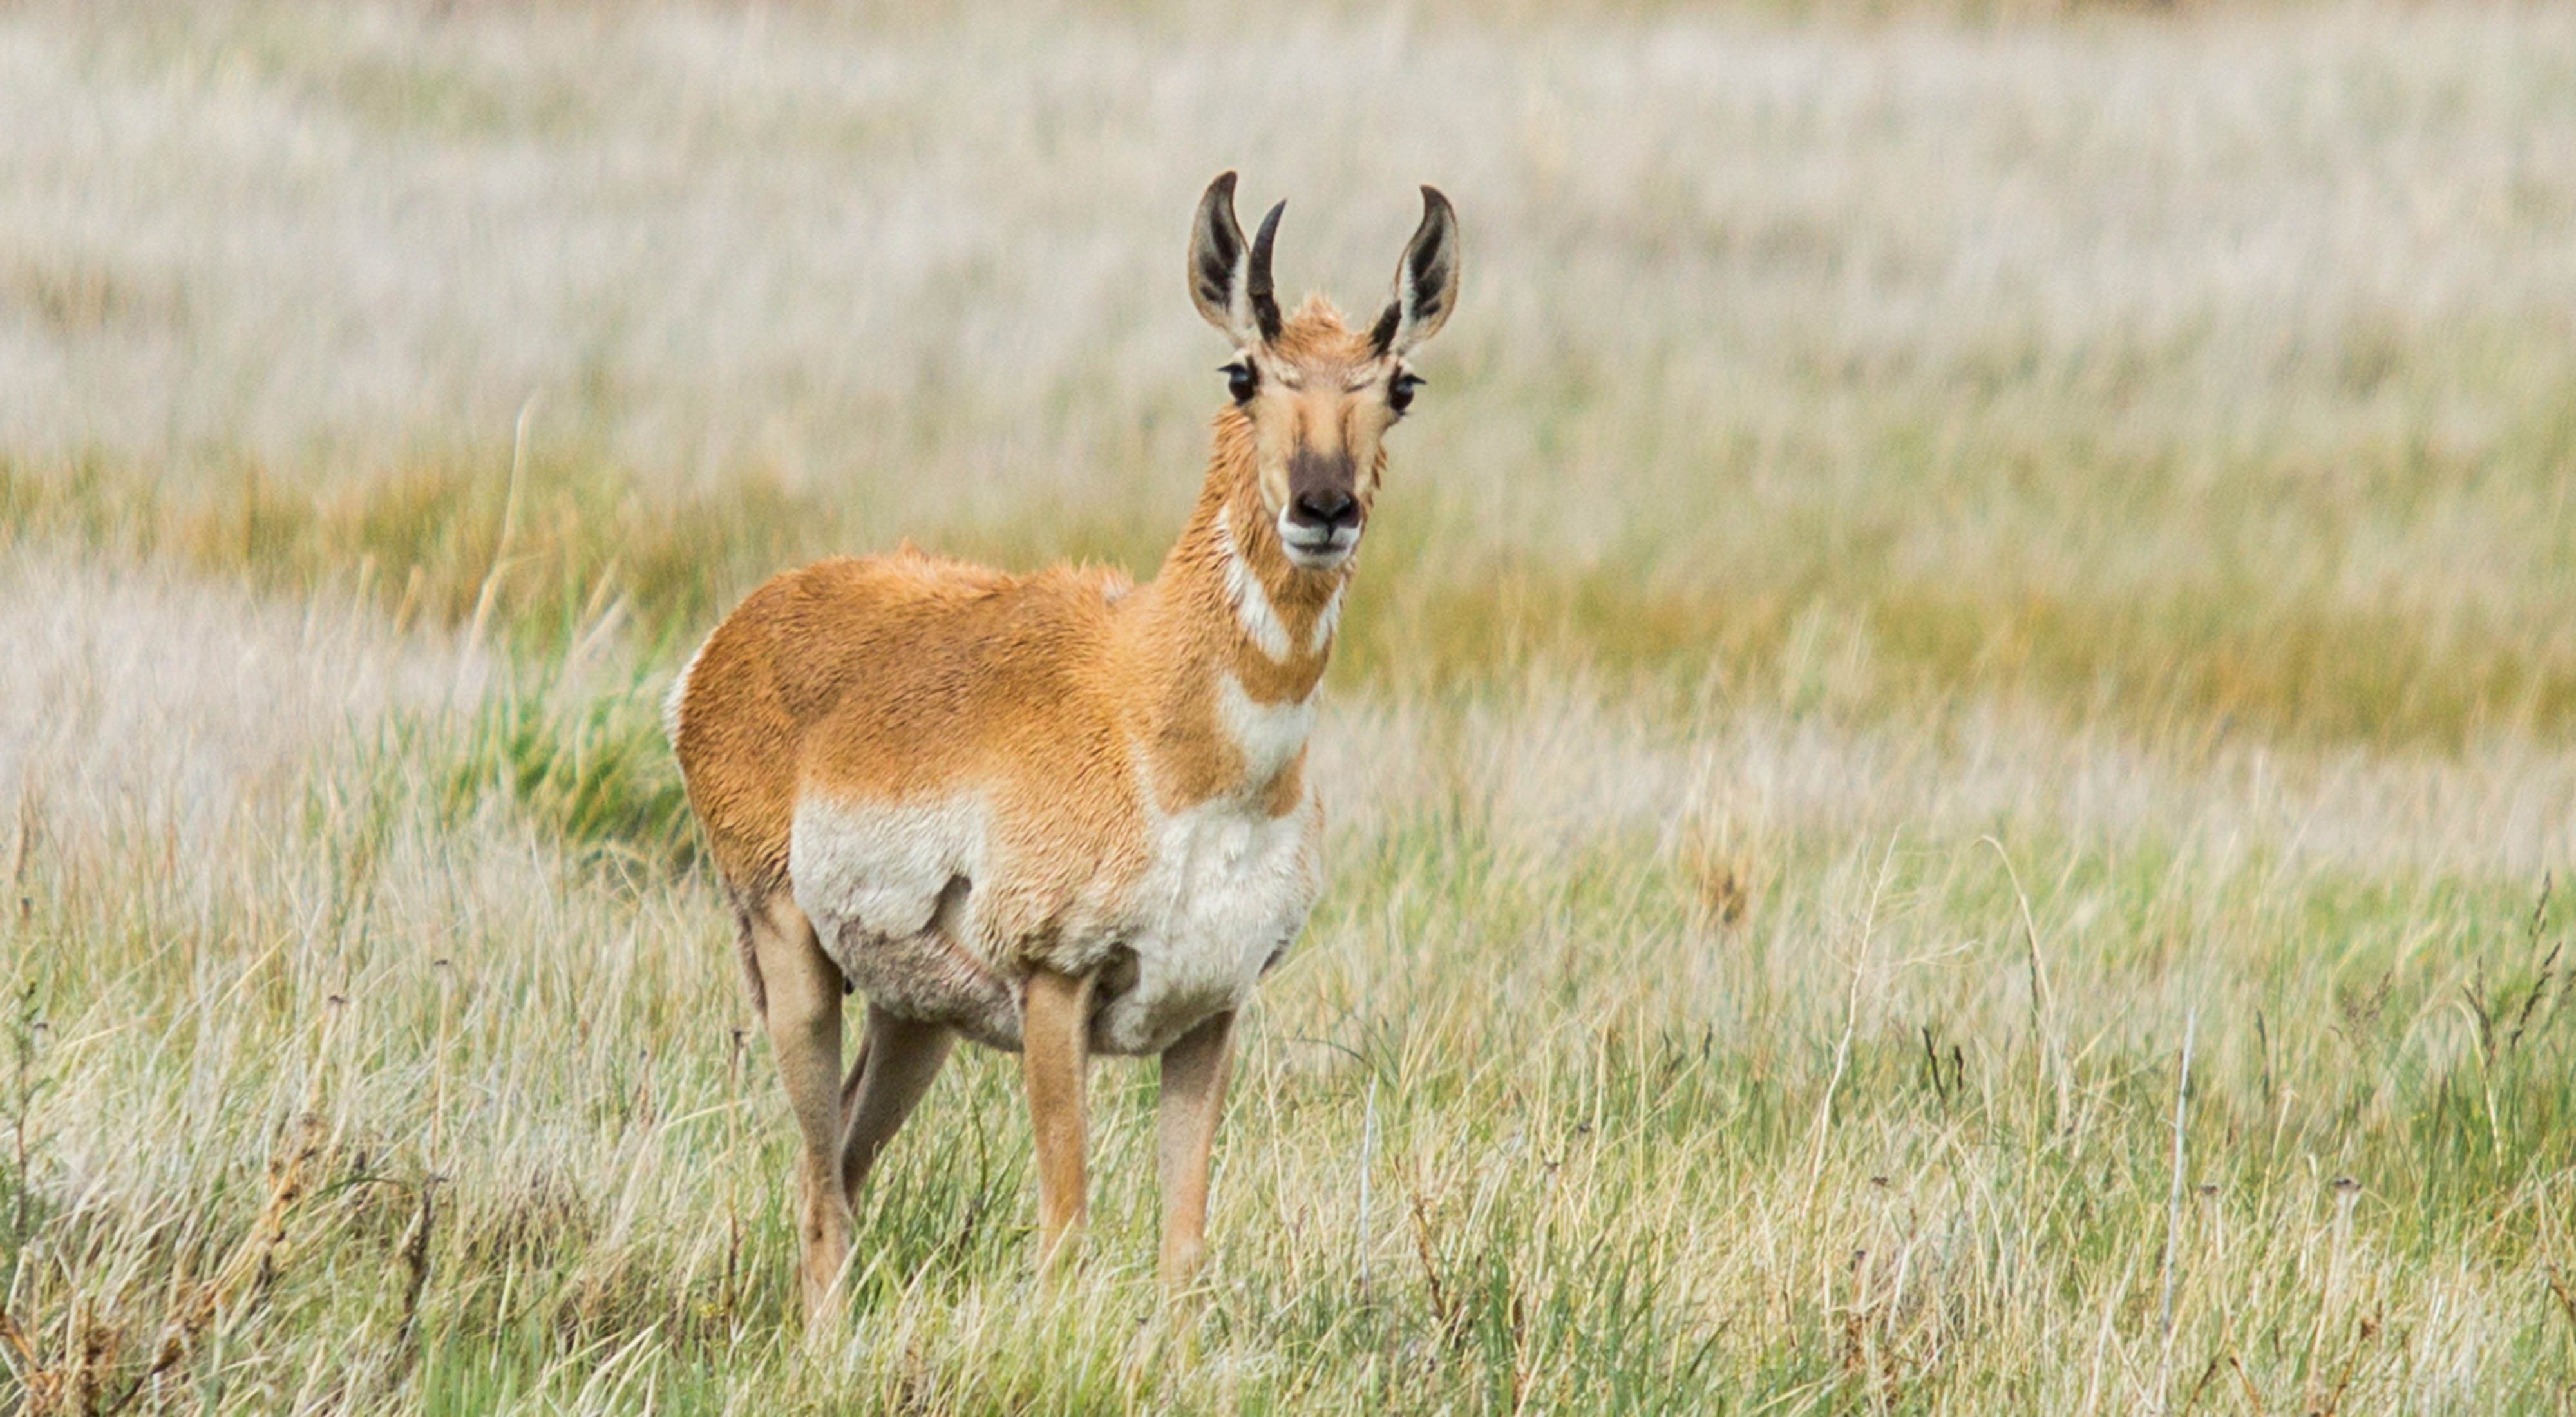 Pronghorn antelope facing the camera surrounded by tall grasses in a field.